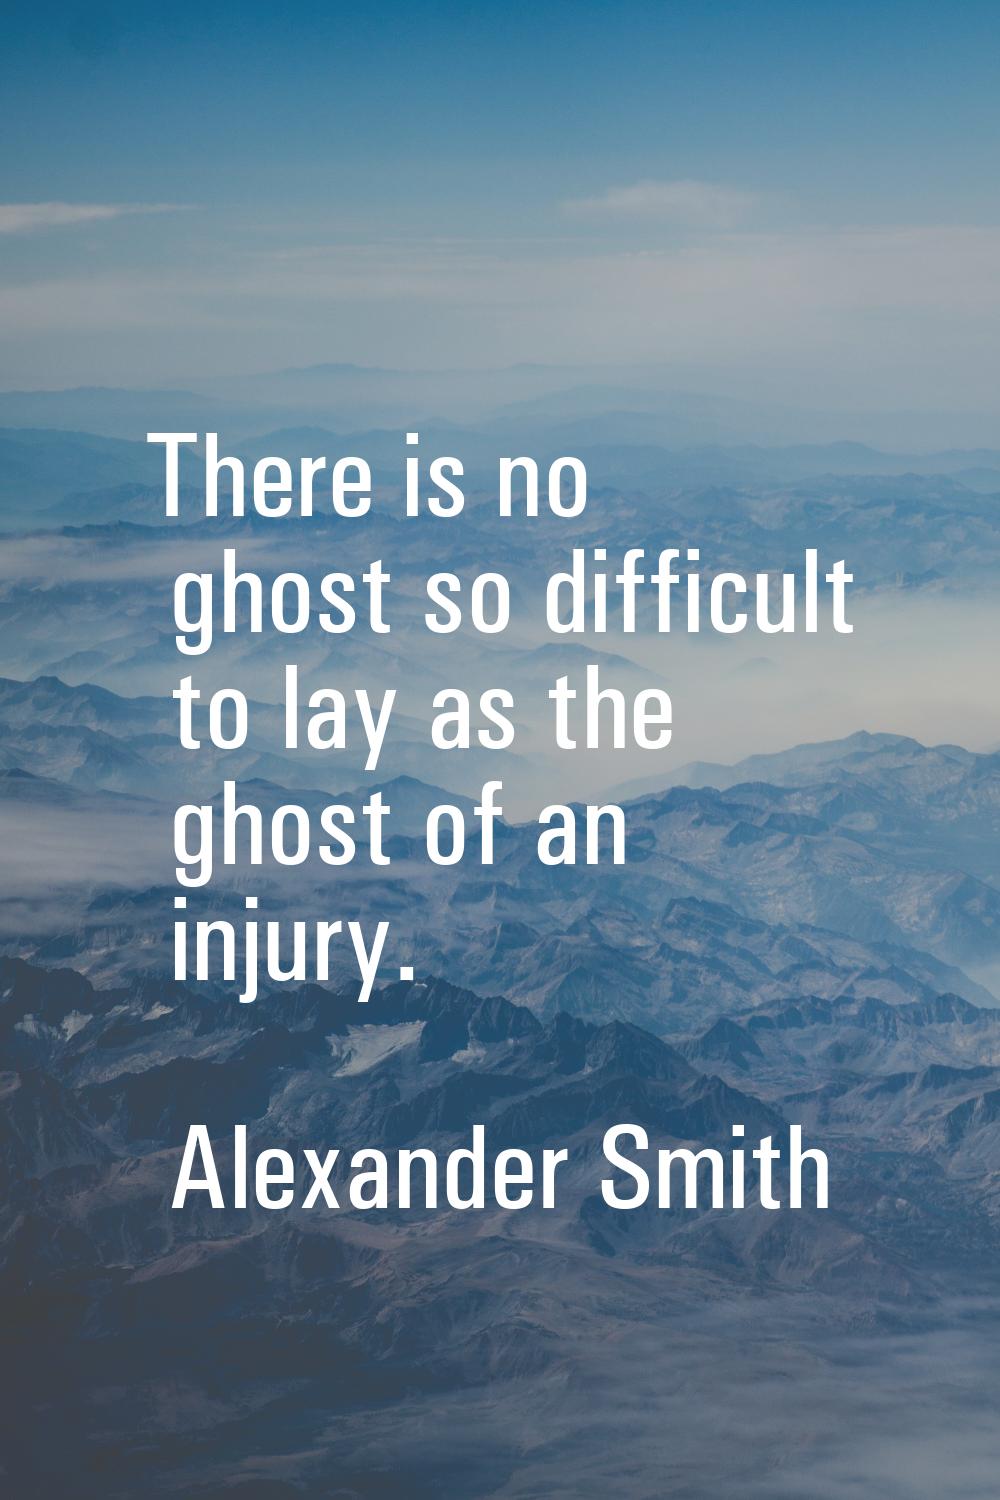 There is no ghost so difficult to lay as the ghost of an injury.